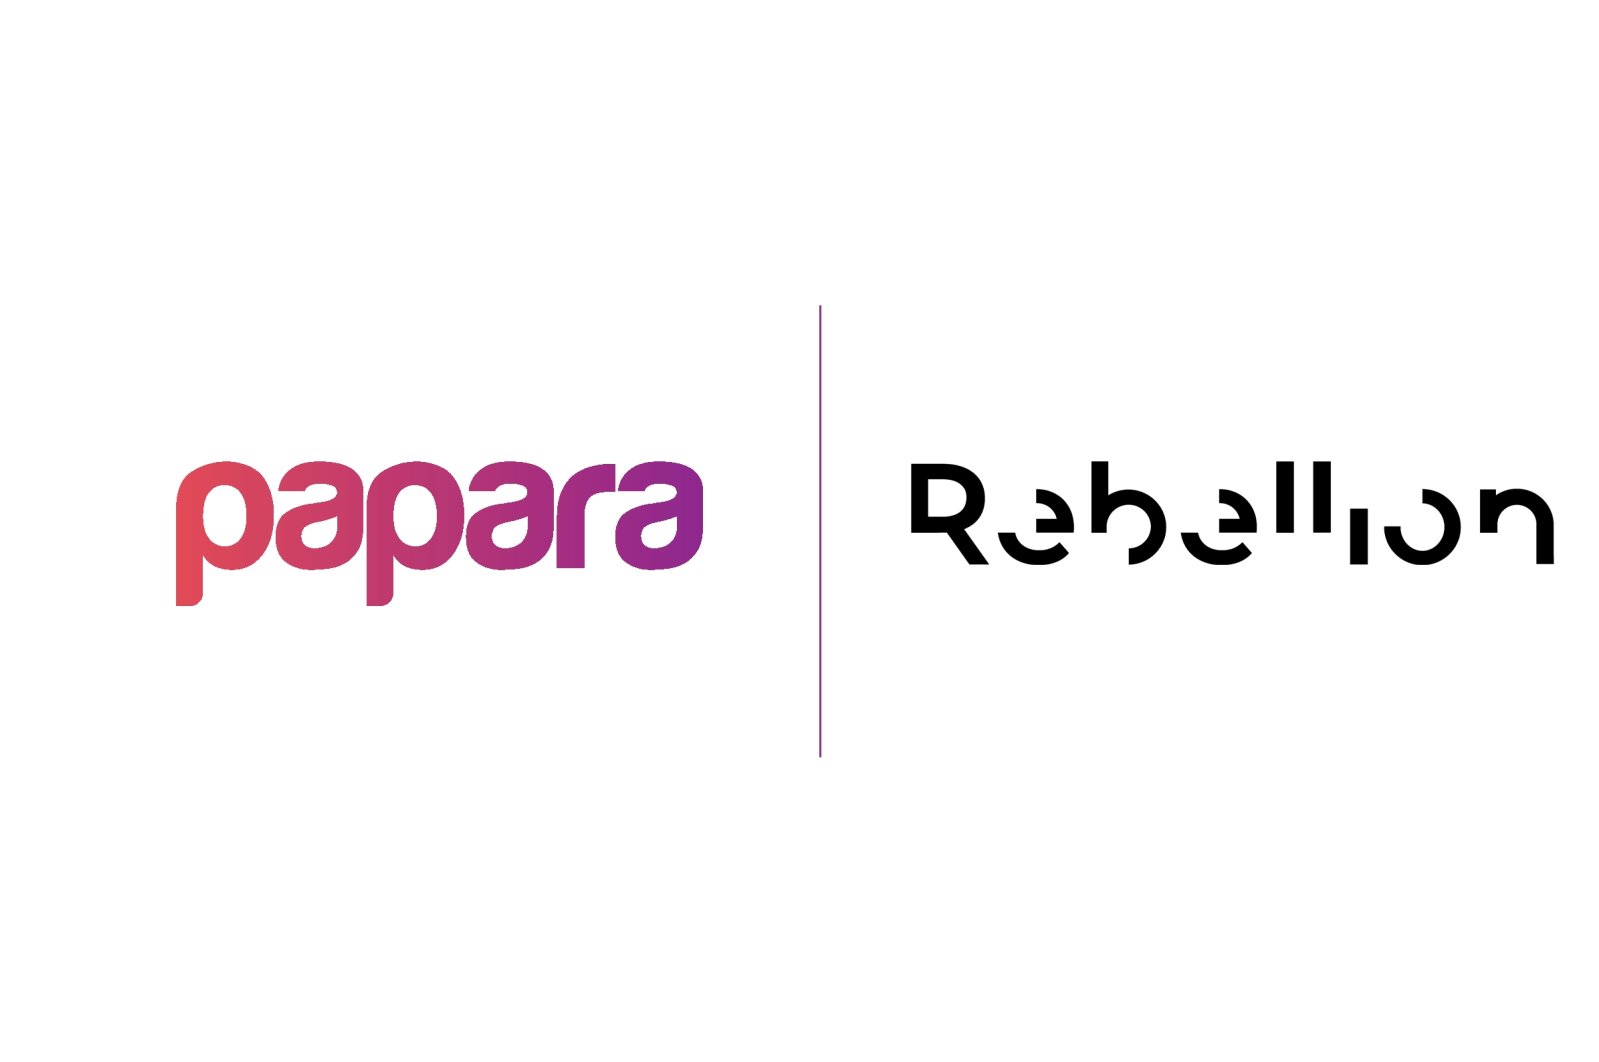 The Papara and Rebellion logos are seen together in this illustration. (Courtesy of Papara)